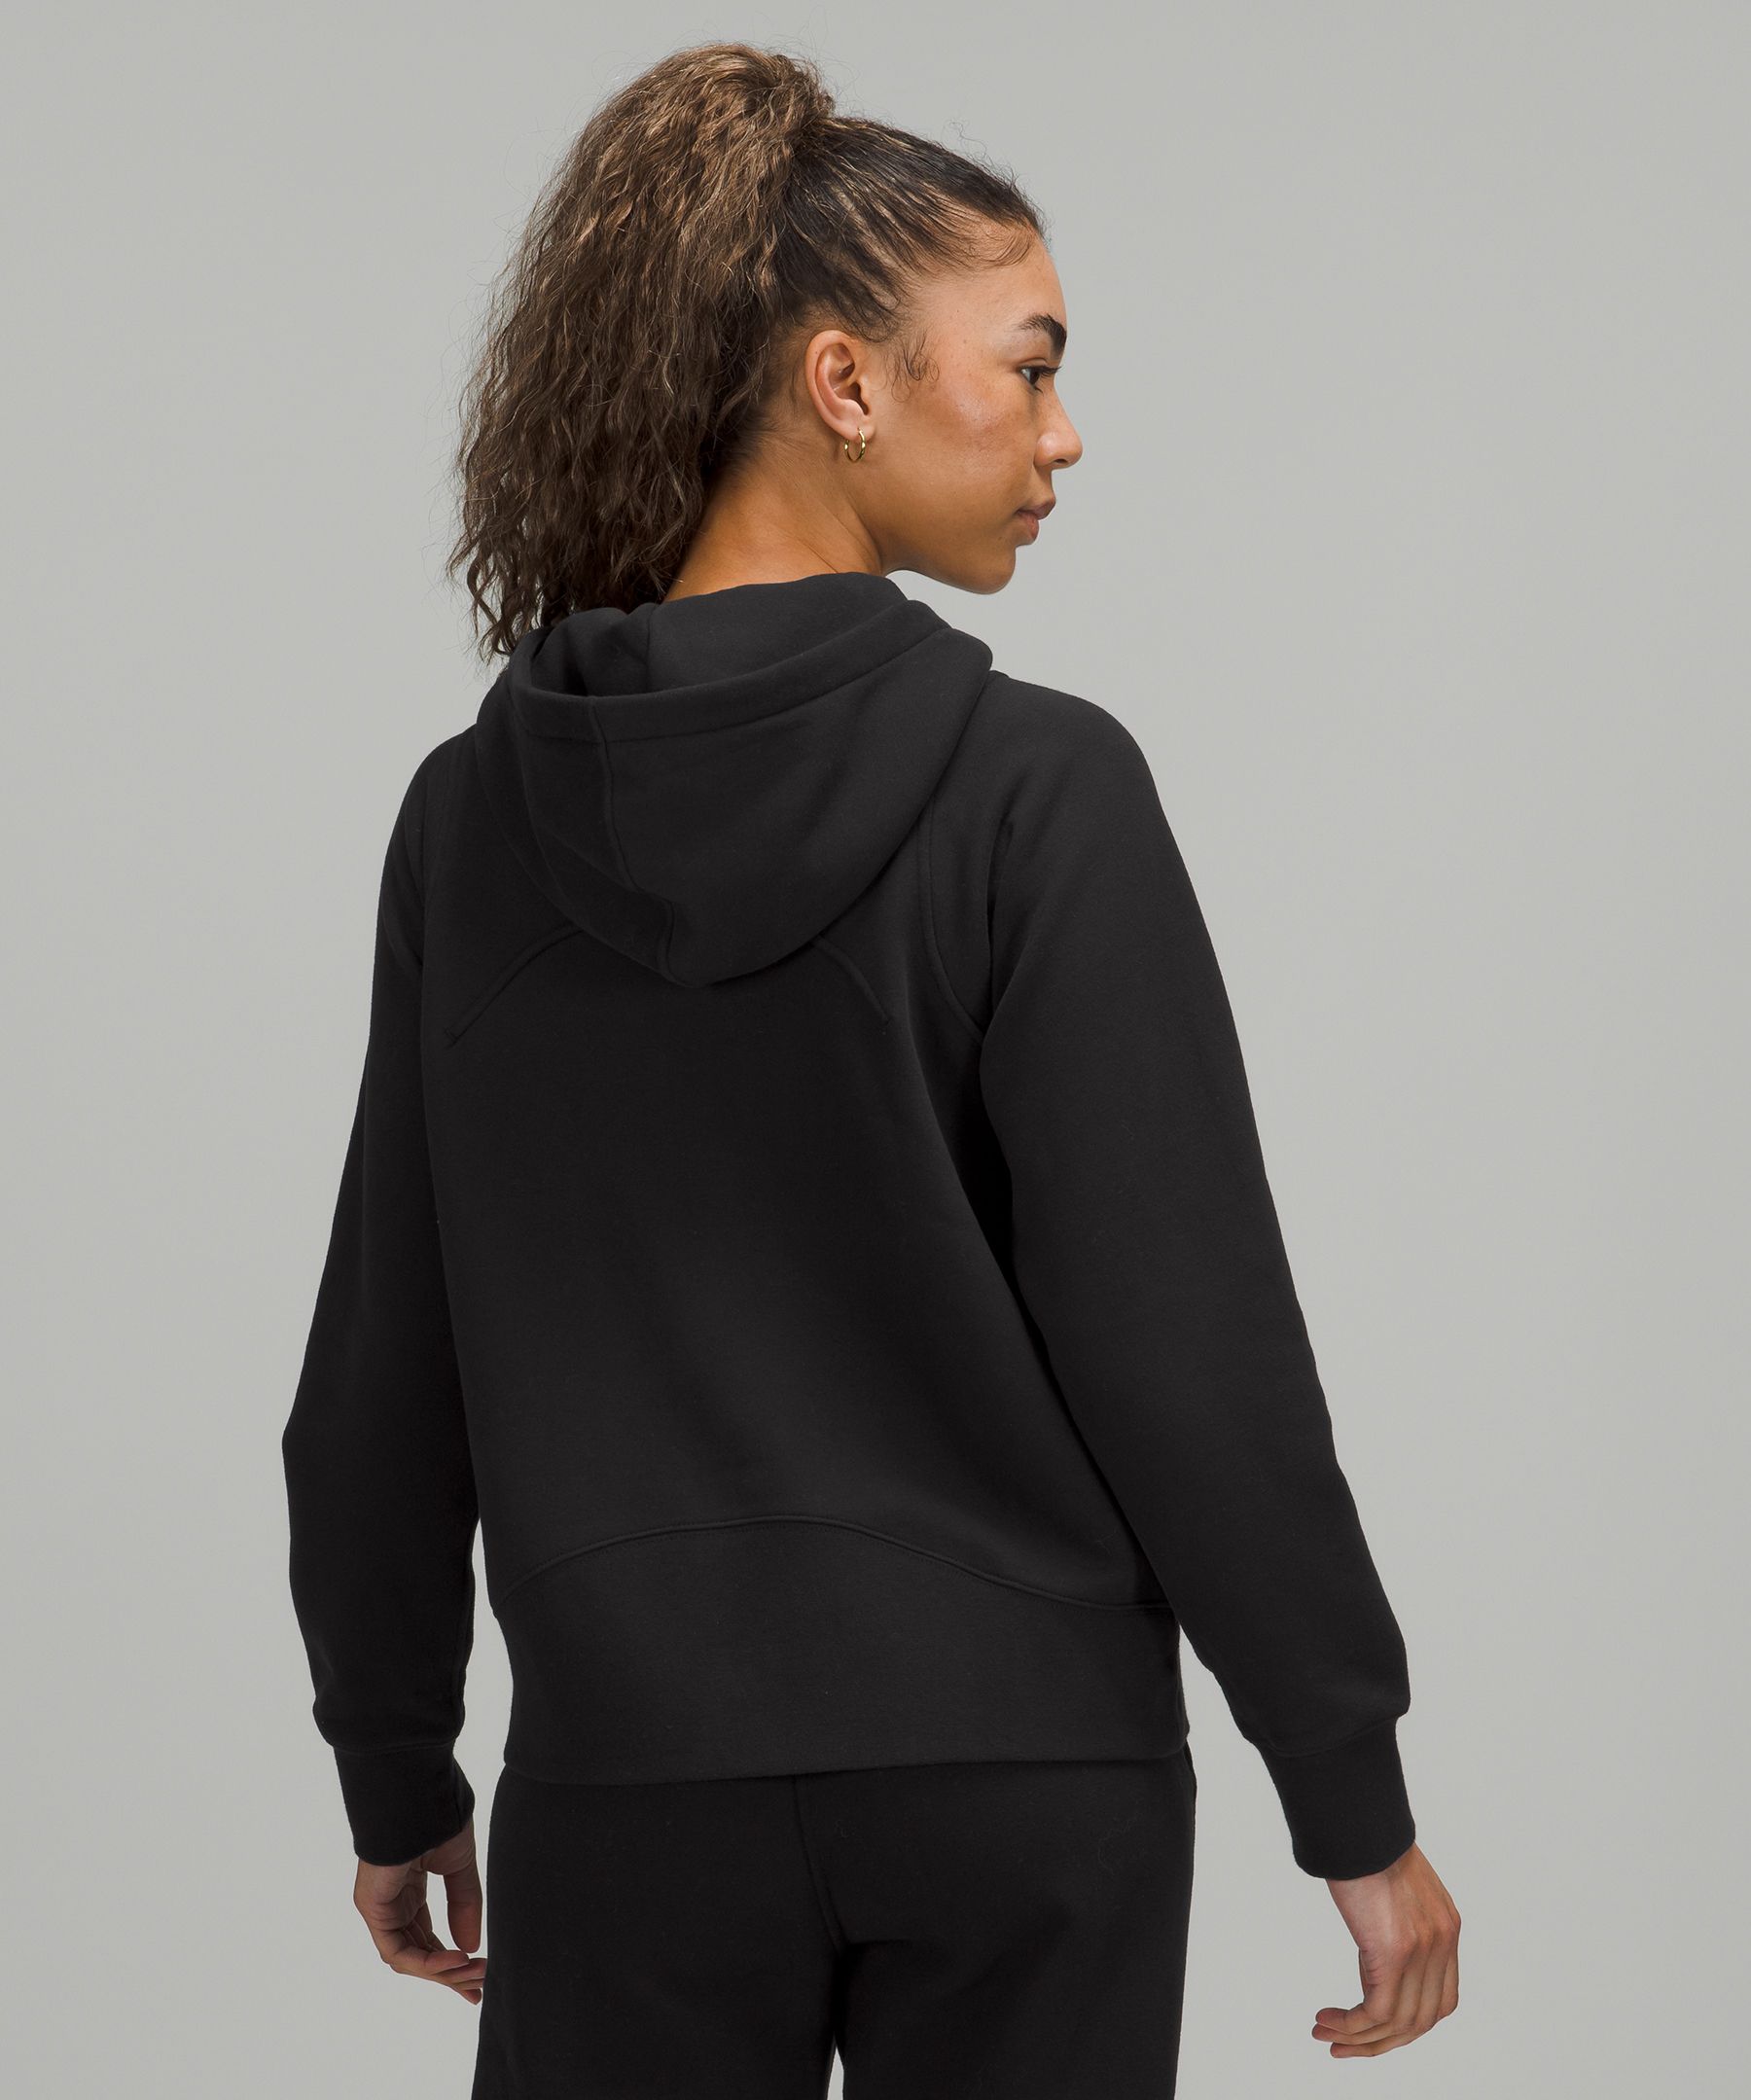 Fit Review Friday! RepelShell Classic Fit Hoodie, Loungeful Zip